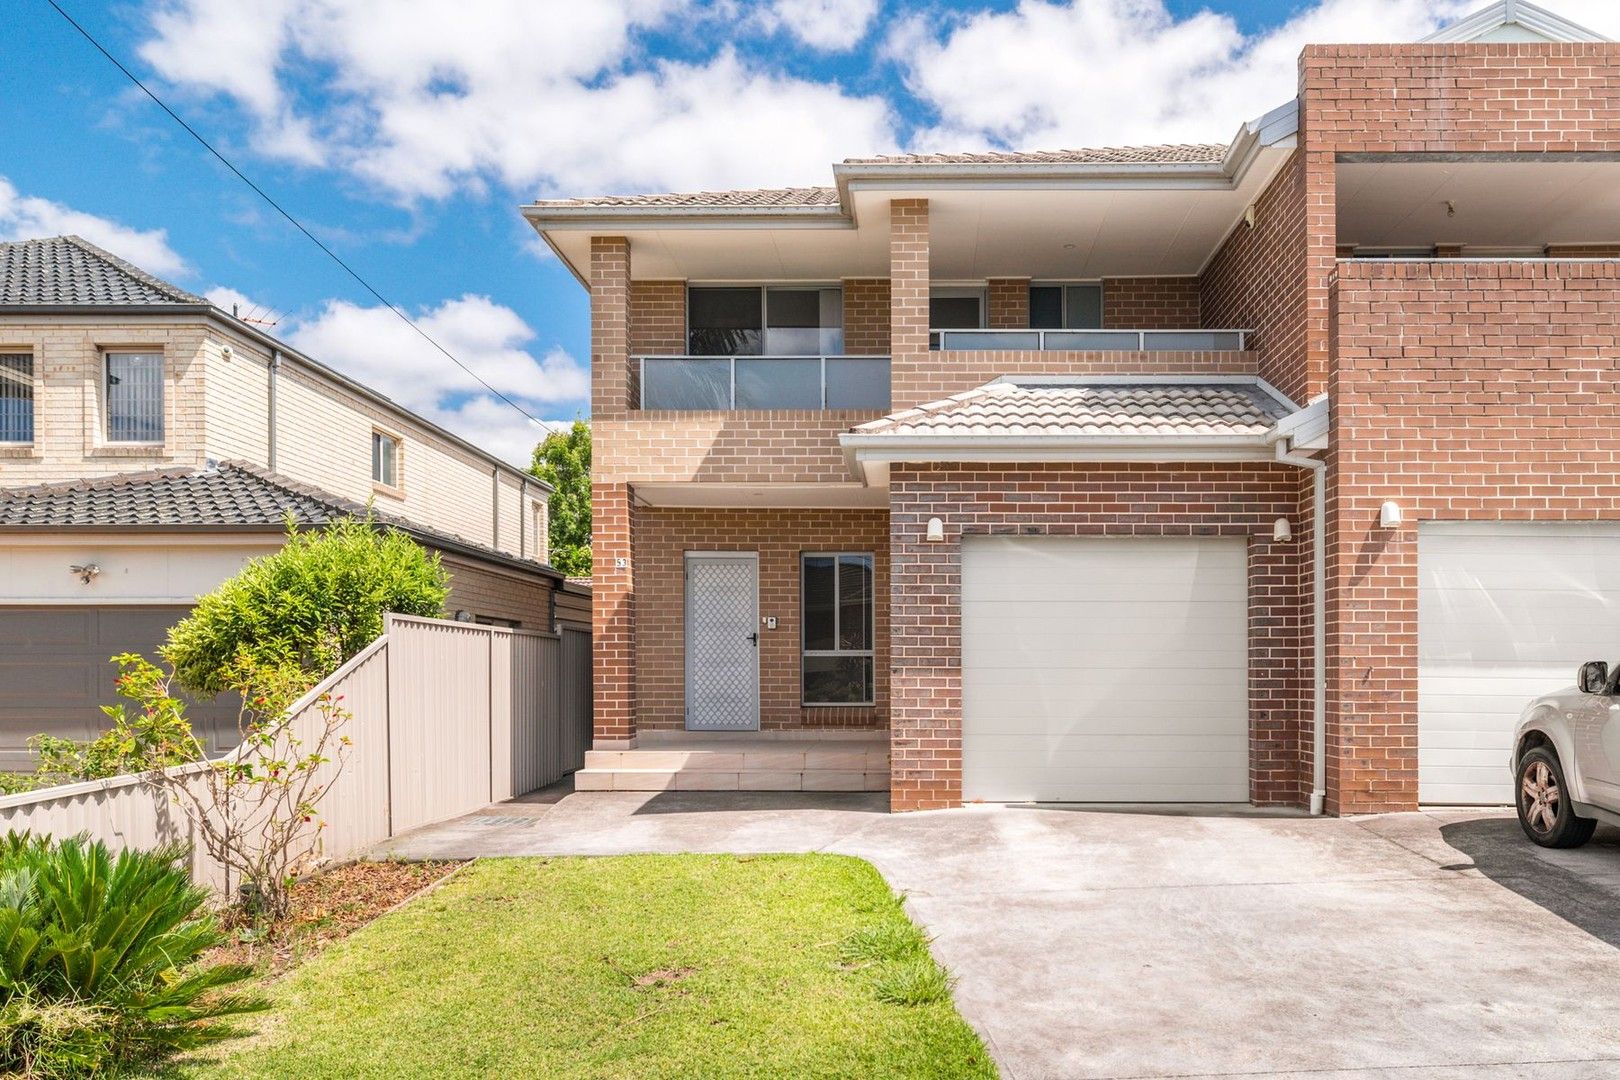 53 Glenview Ave, Revesby NSW 2212, Image 0